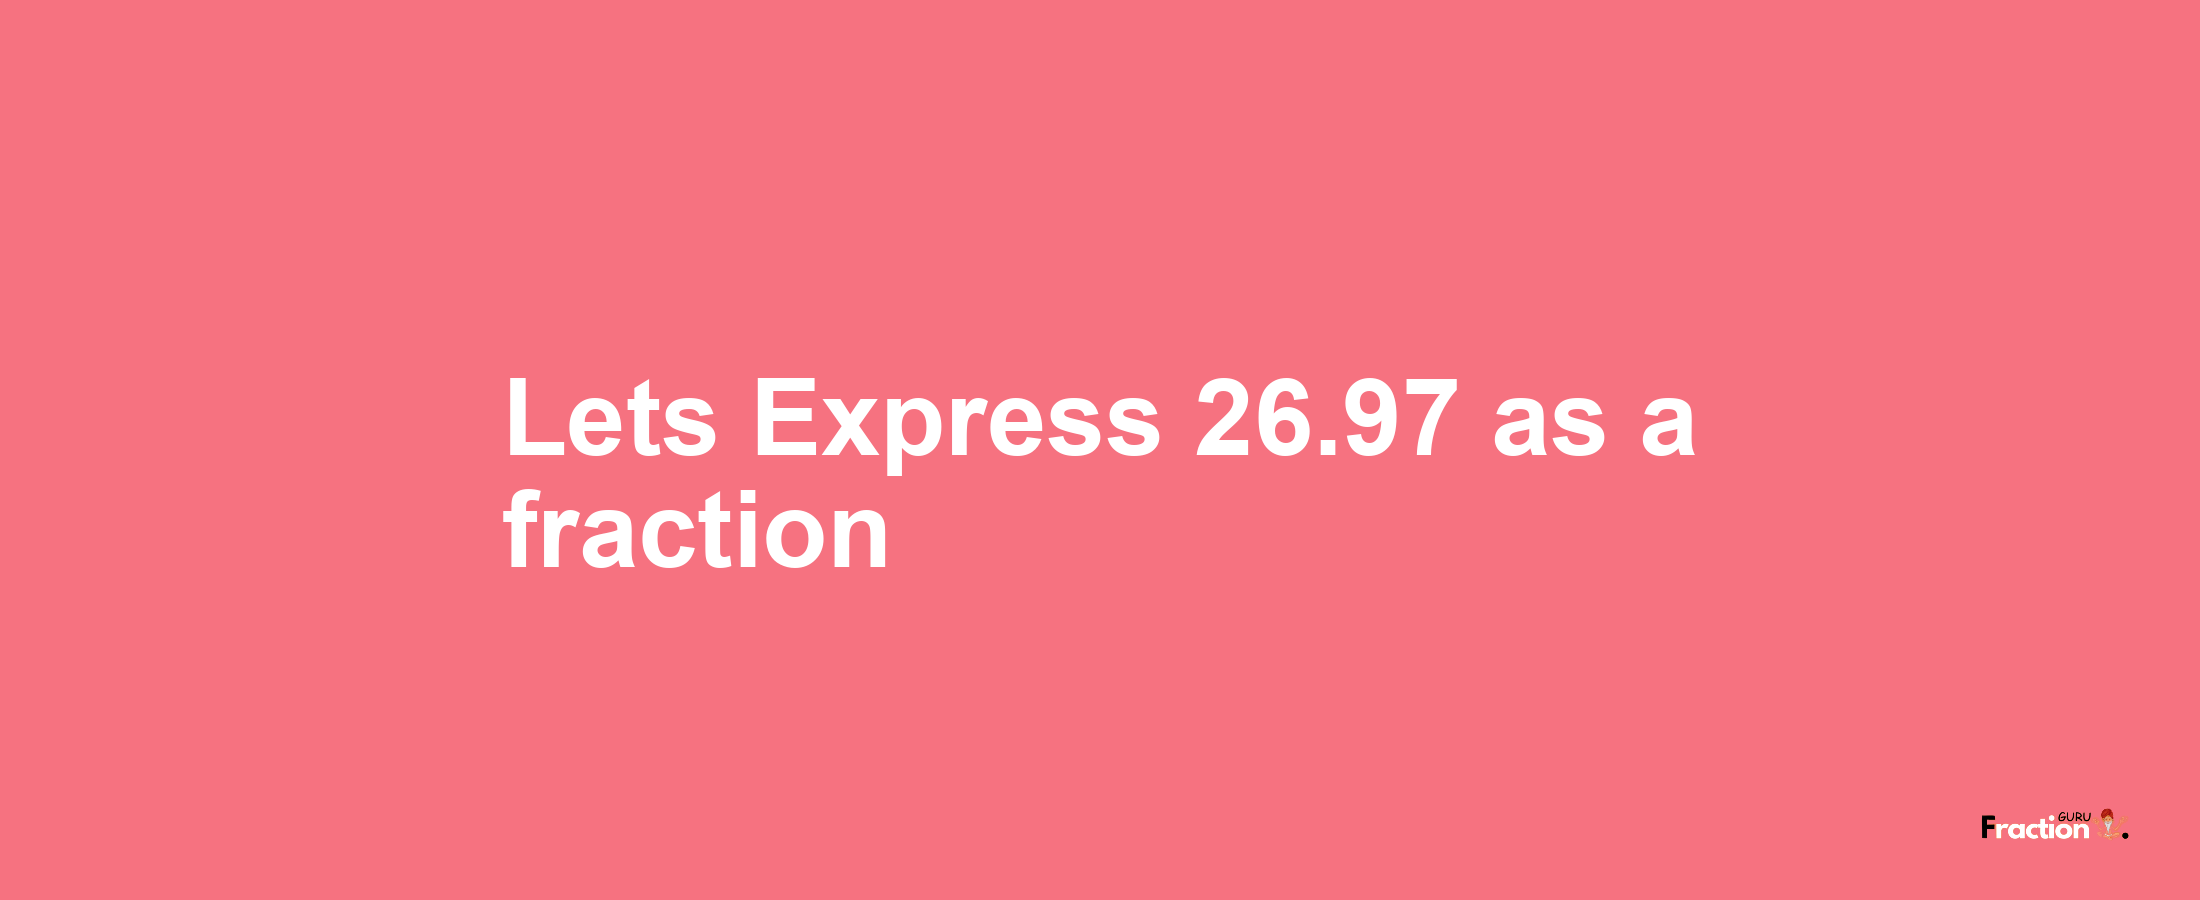 Lets Express 26.97 as afraction